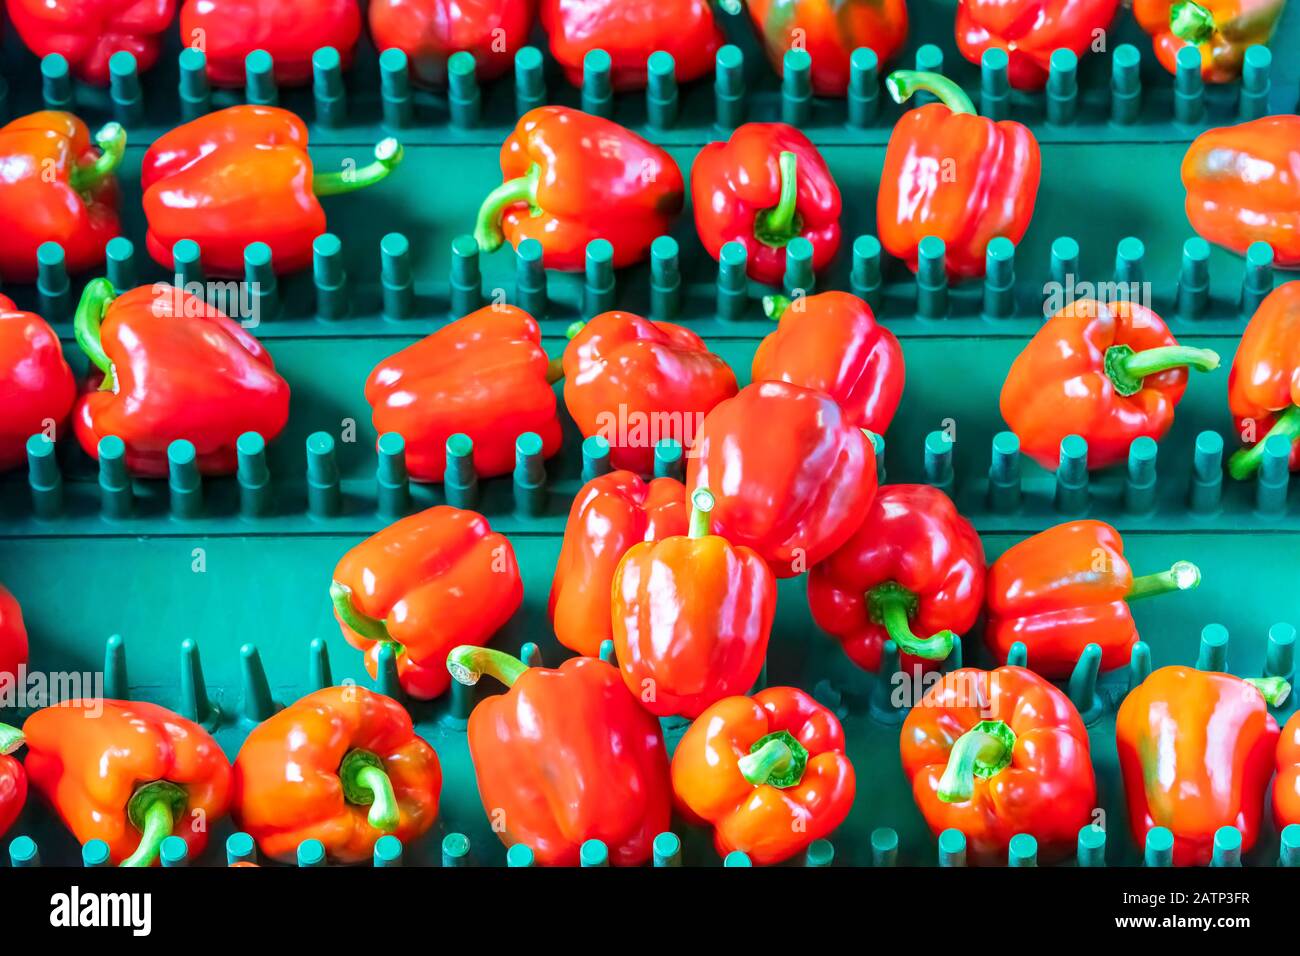 Sorting of red bell peppers on a conveyor belt during harvest Stock Photo